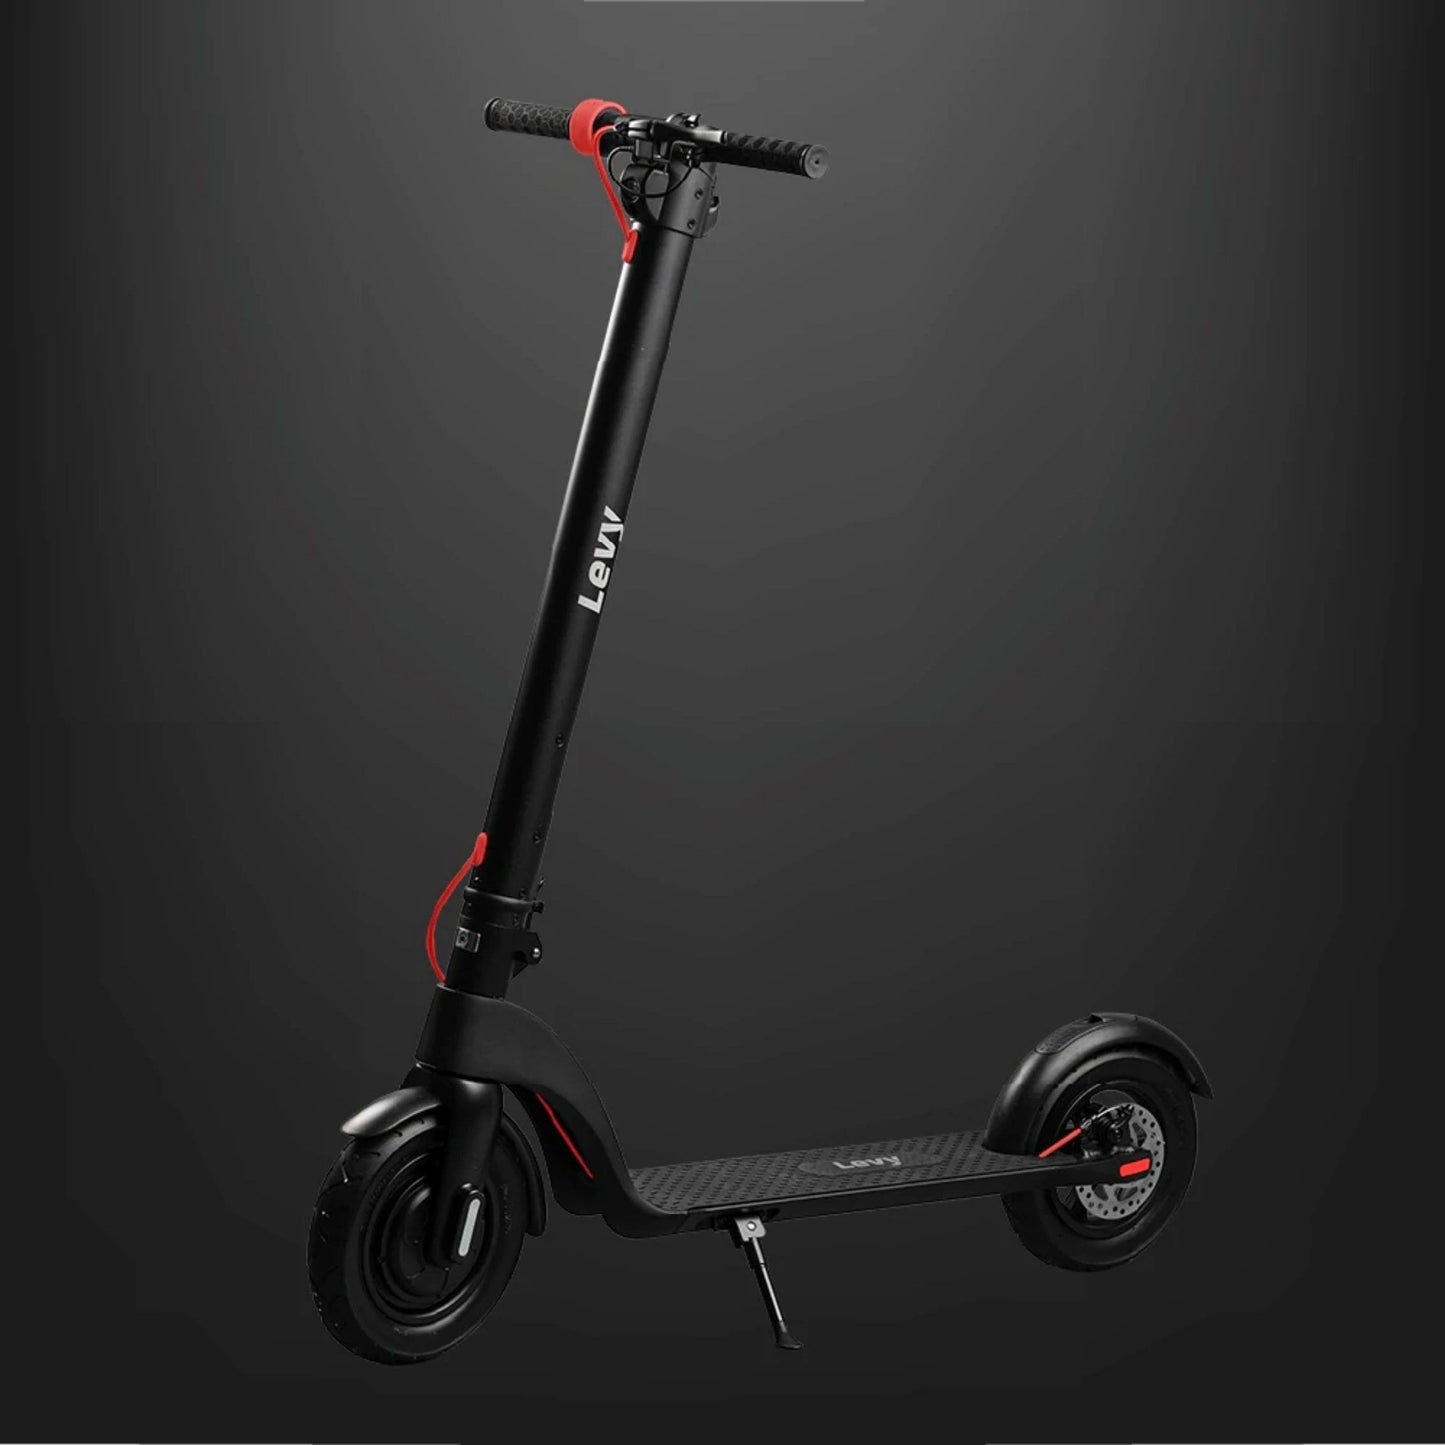 The Levy Electric Scooter